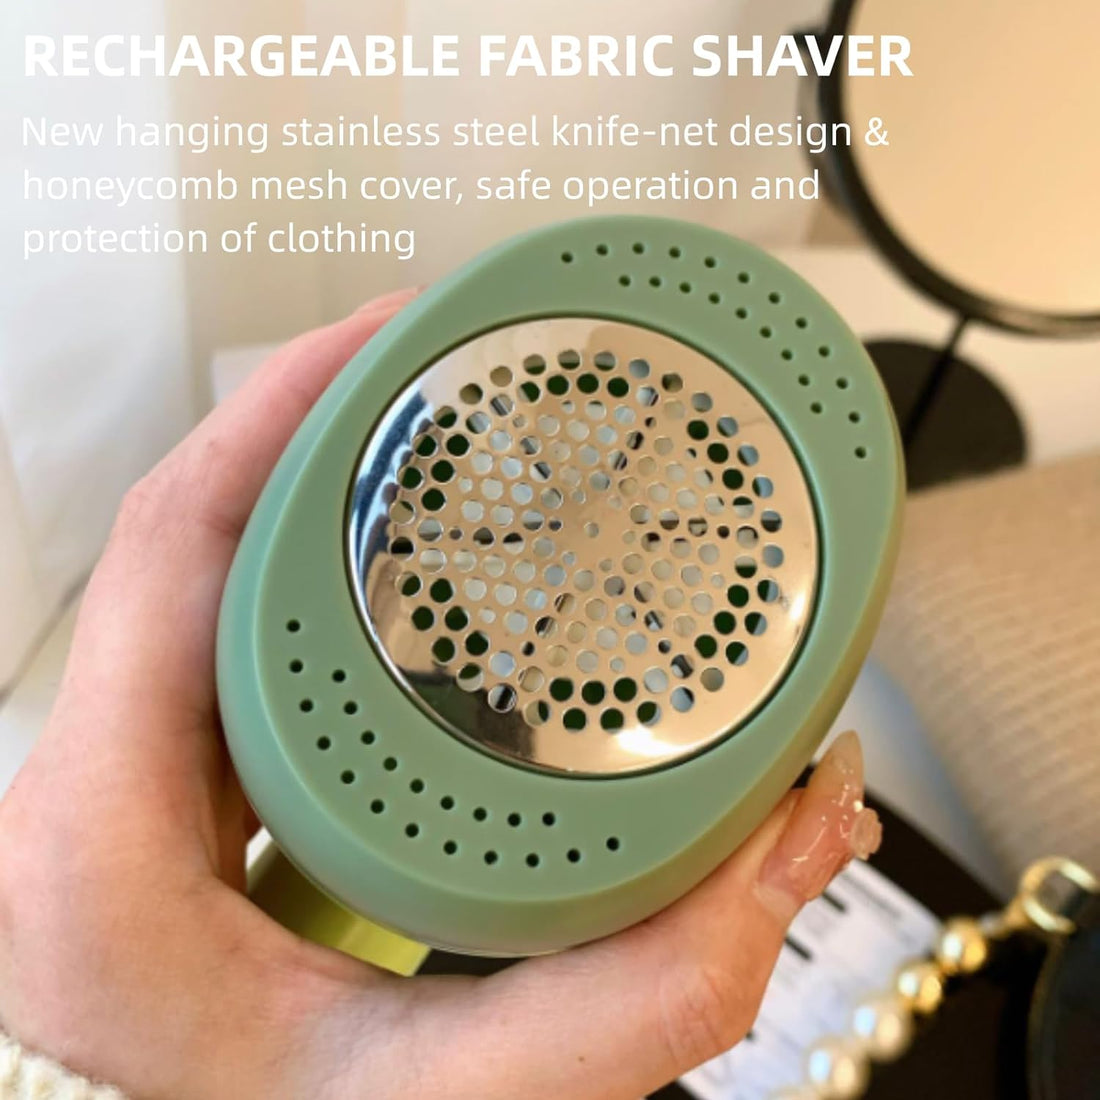 Rechargeable Fabric Shaver, Fabric Shaver with lint Roller, Sweater Shaver, Electric Lint Remover, for Removing Fuzz and Pill from Clothes, Furniture, Sweater, Couch and Blanket